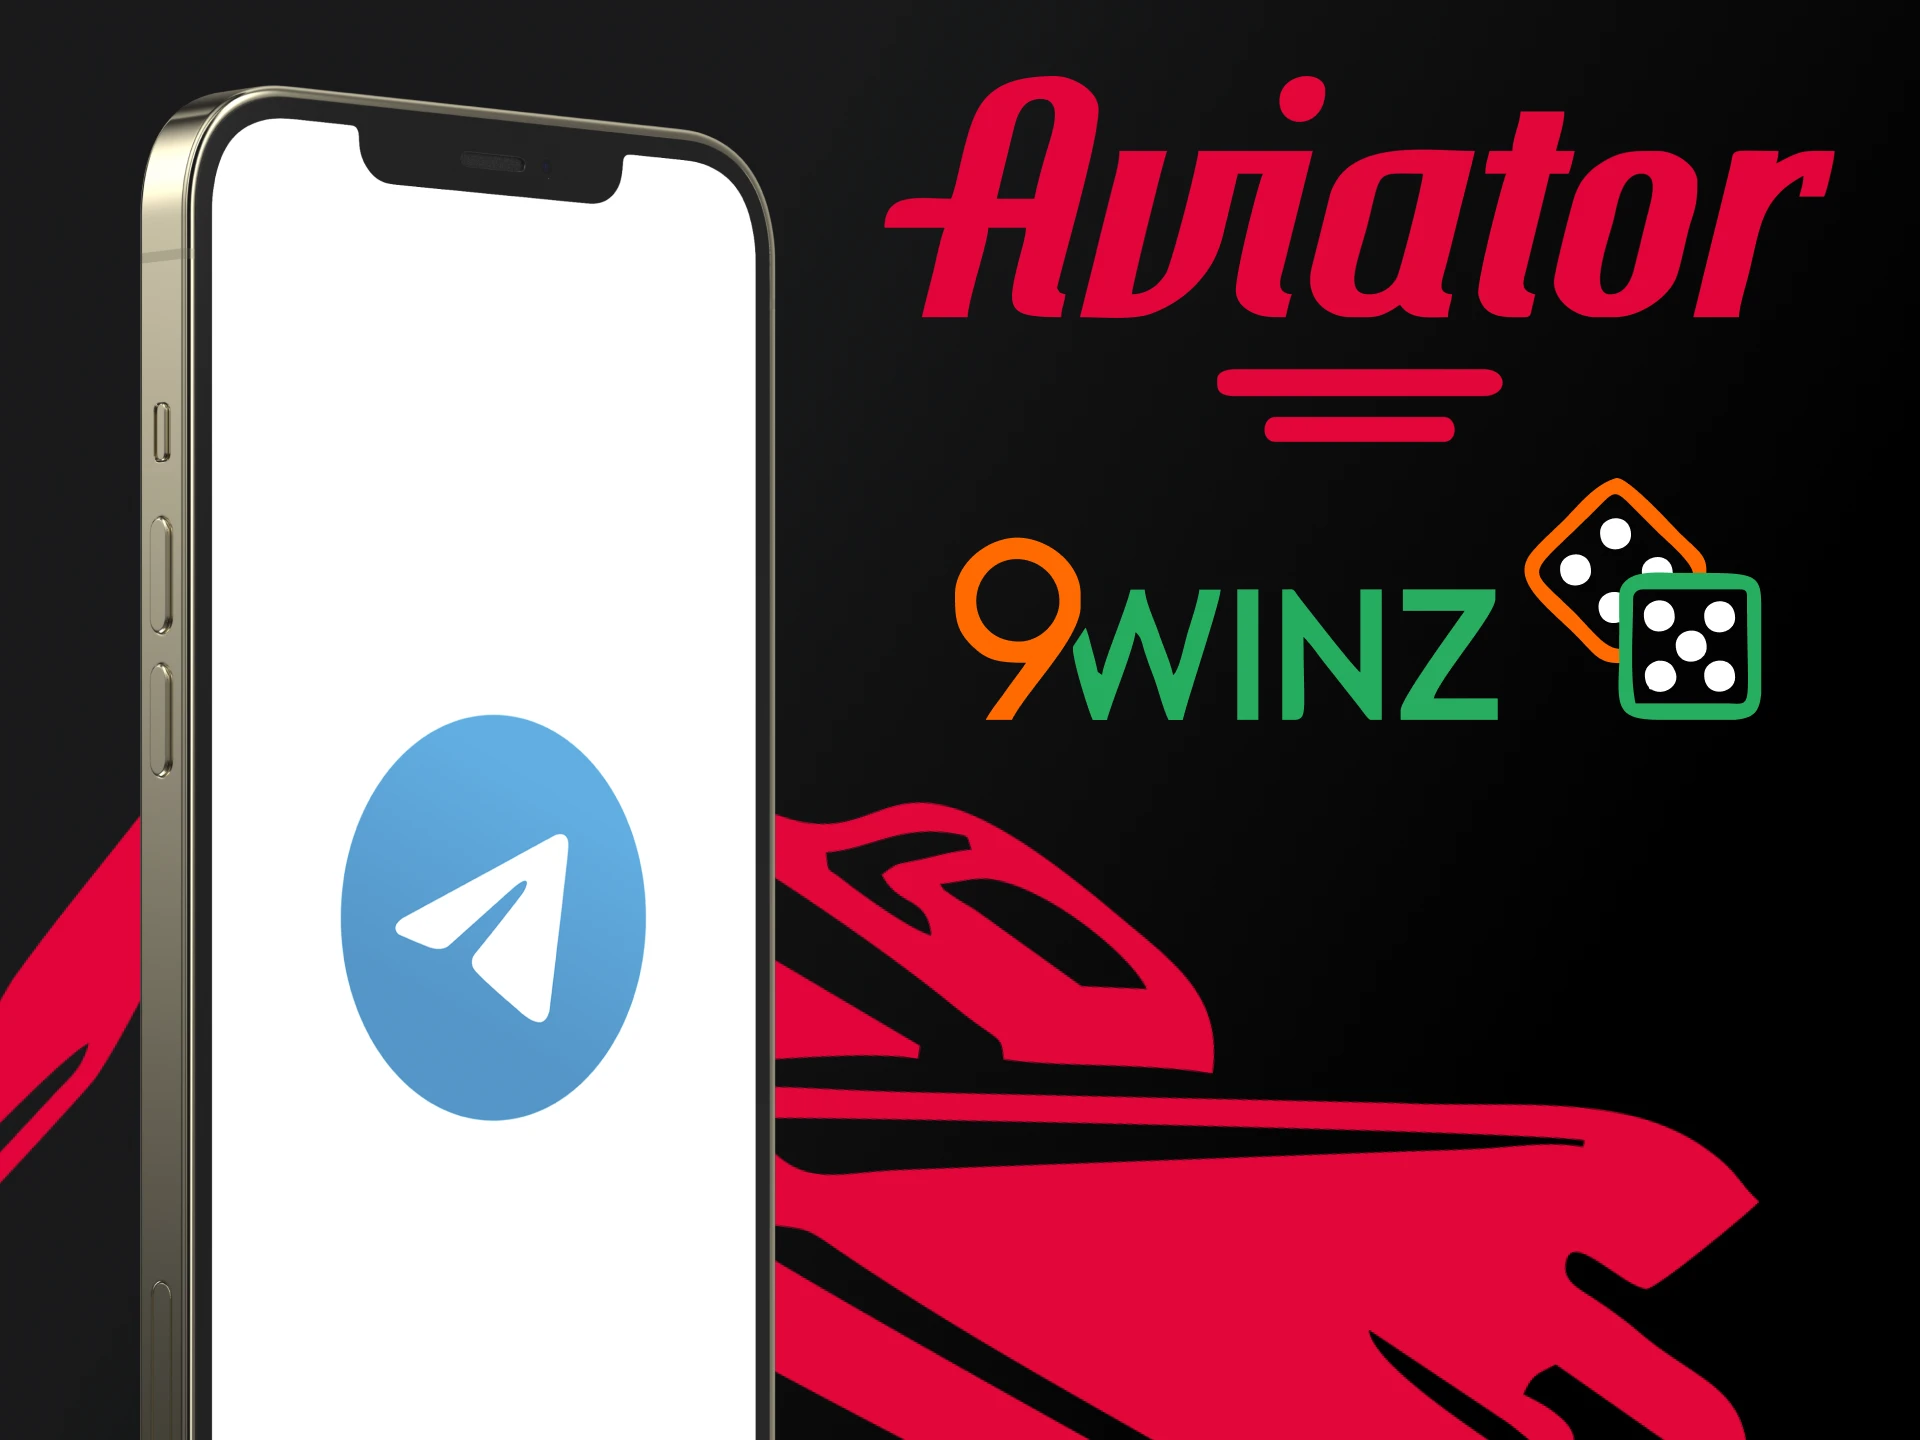 You can use the Aviator signal on 9winz.